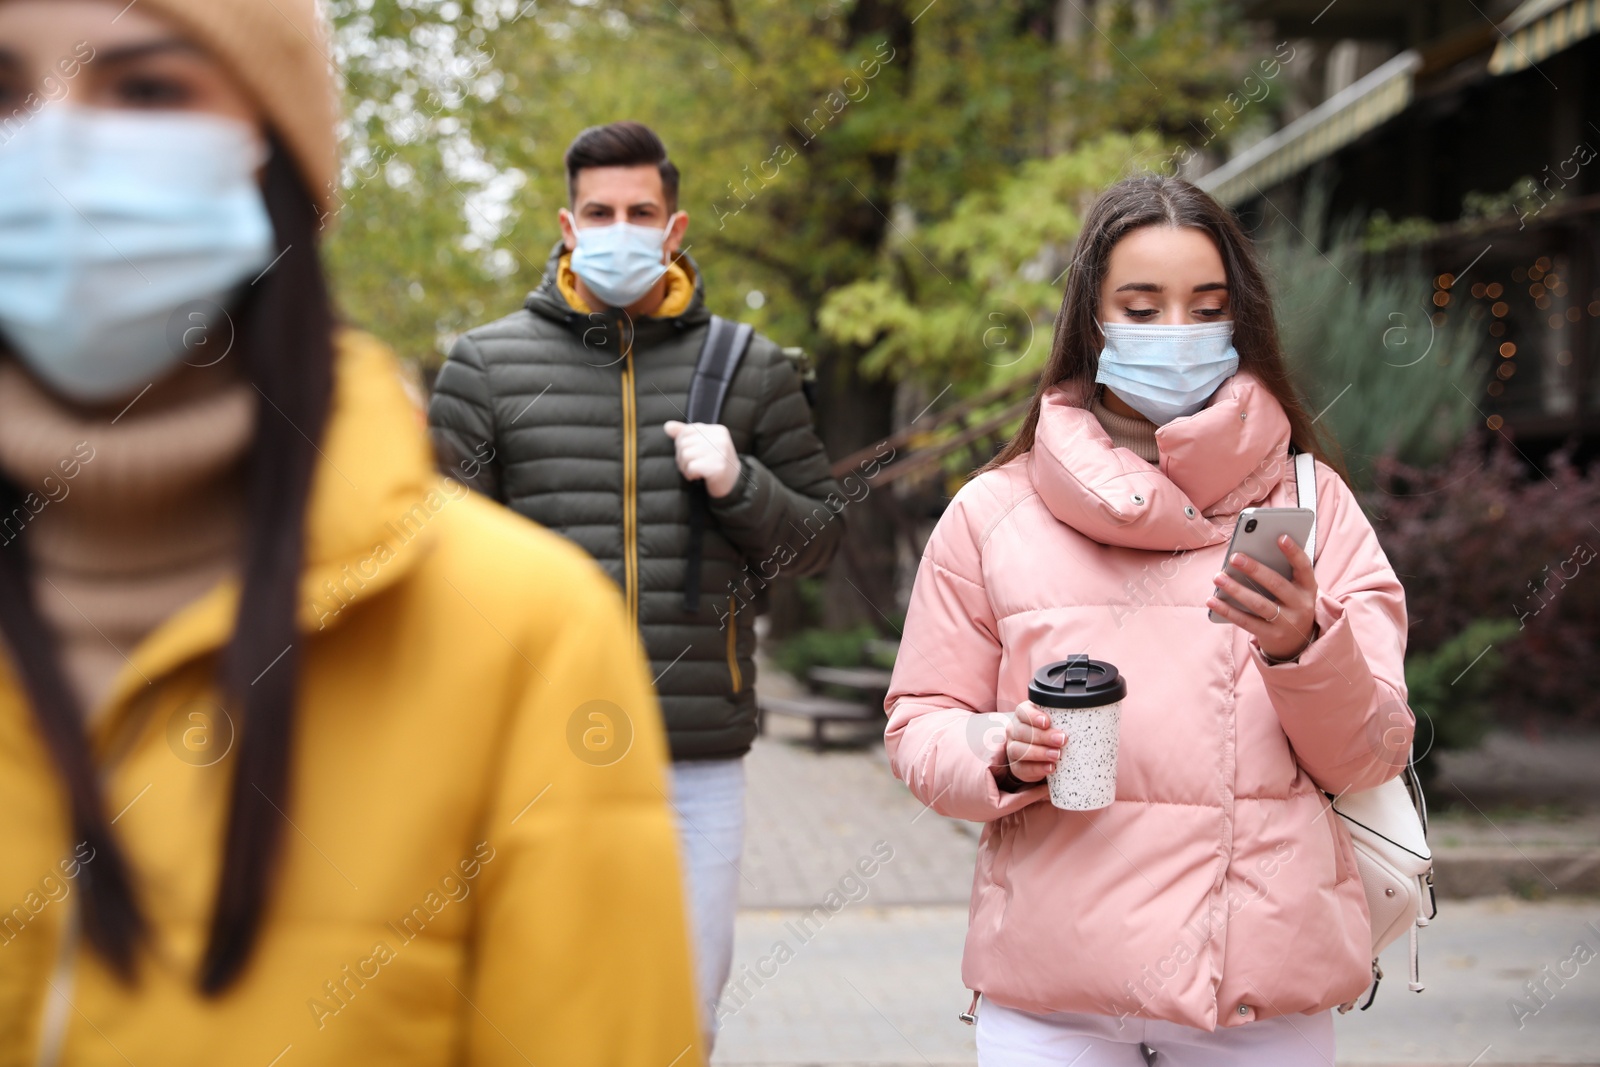 Photo of People in medical face masks walking outdoors. Personal protection during COVID-19 pandemic